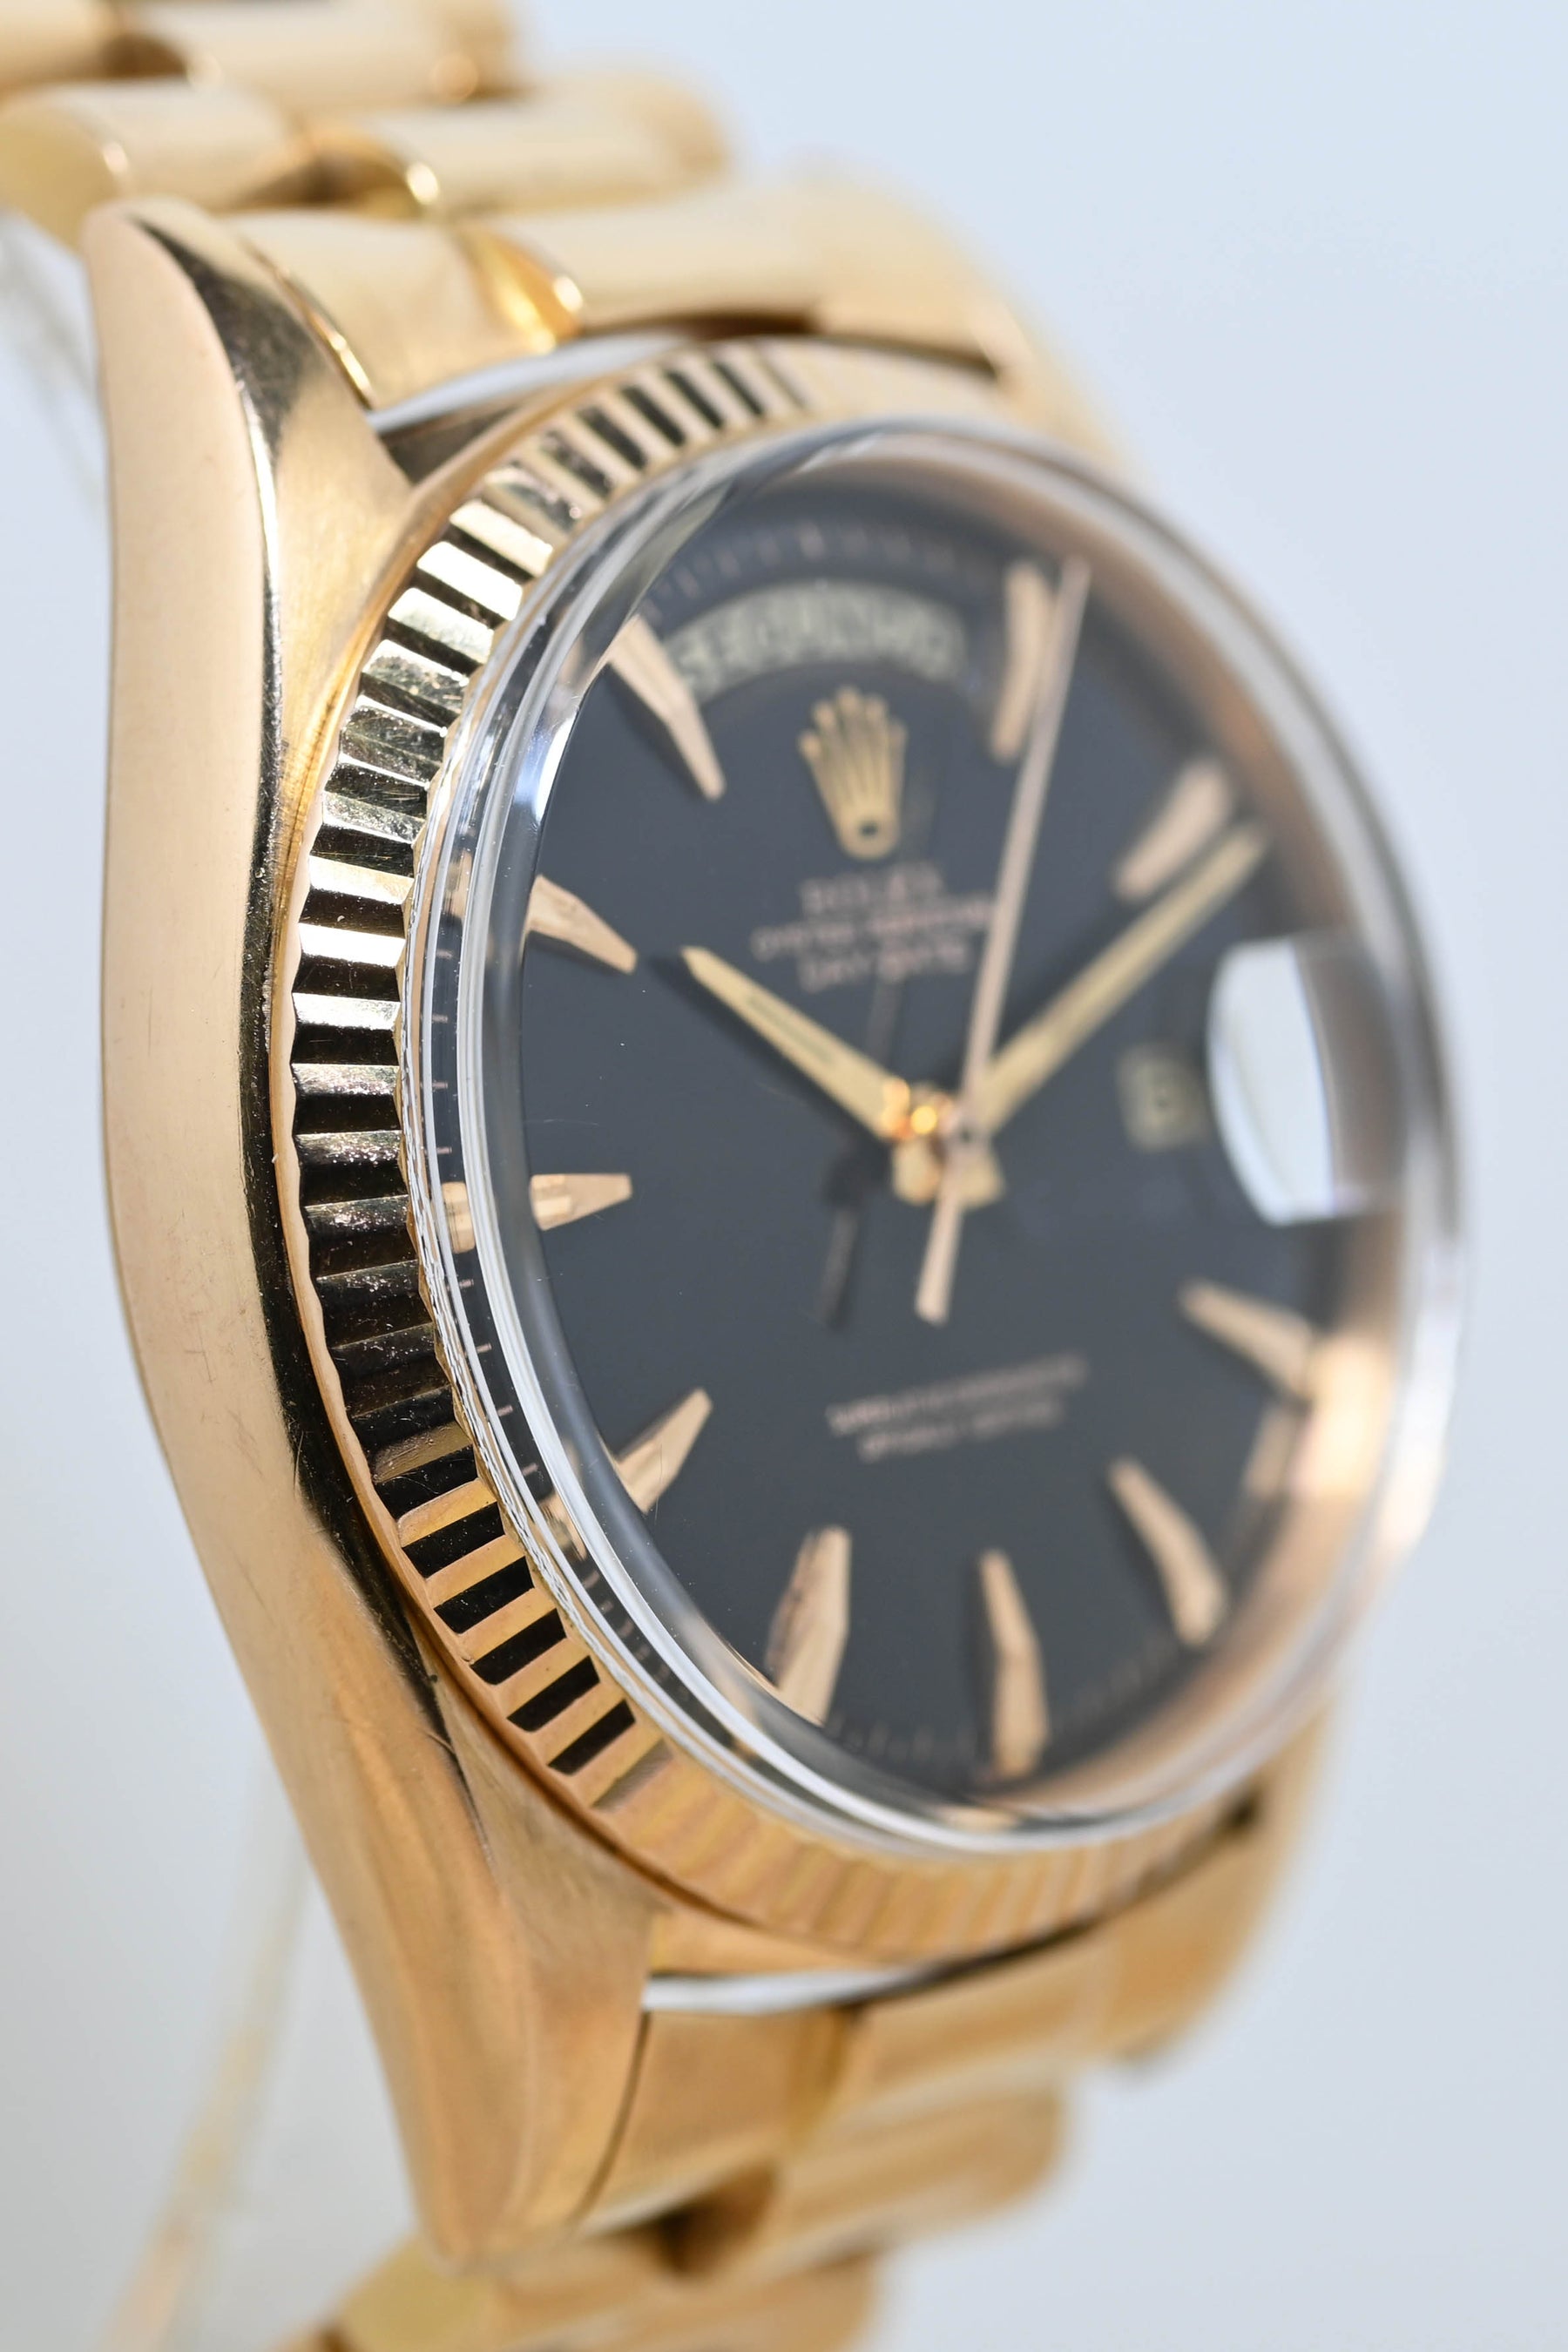 1964 Rolex Day Date Pink Gold Black Lacquer Dial Ref. 1803